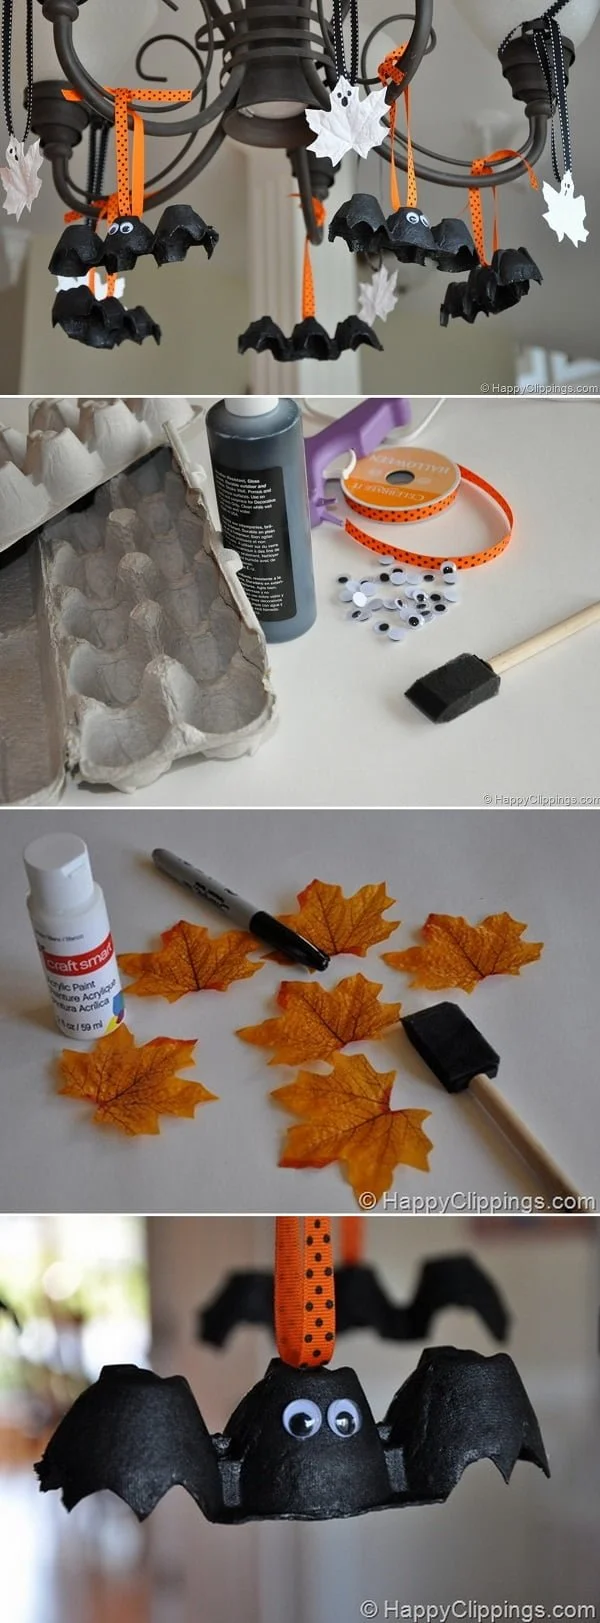 Check out the tutorial on how to make DIY egg cartoon bats and leaf ghosts for Halloween home decoration